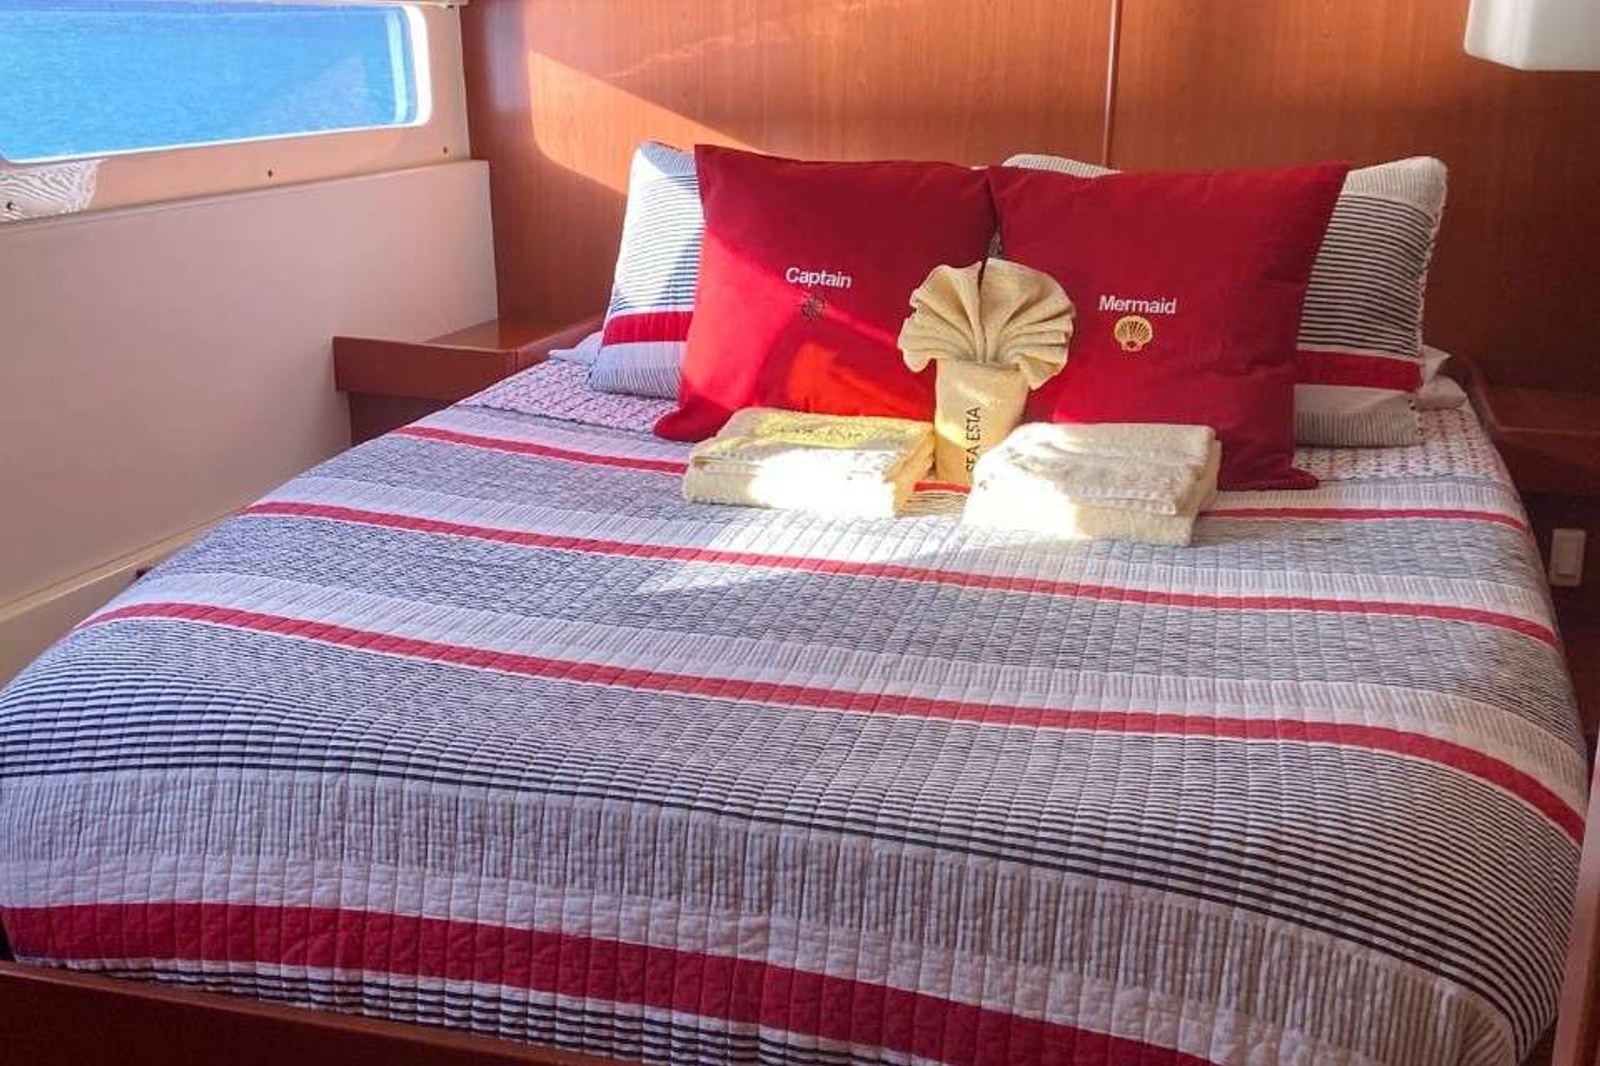  Have the best sleep ever as all staterooms provide cooling memory foam mattress toppers.